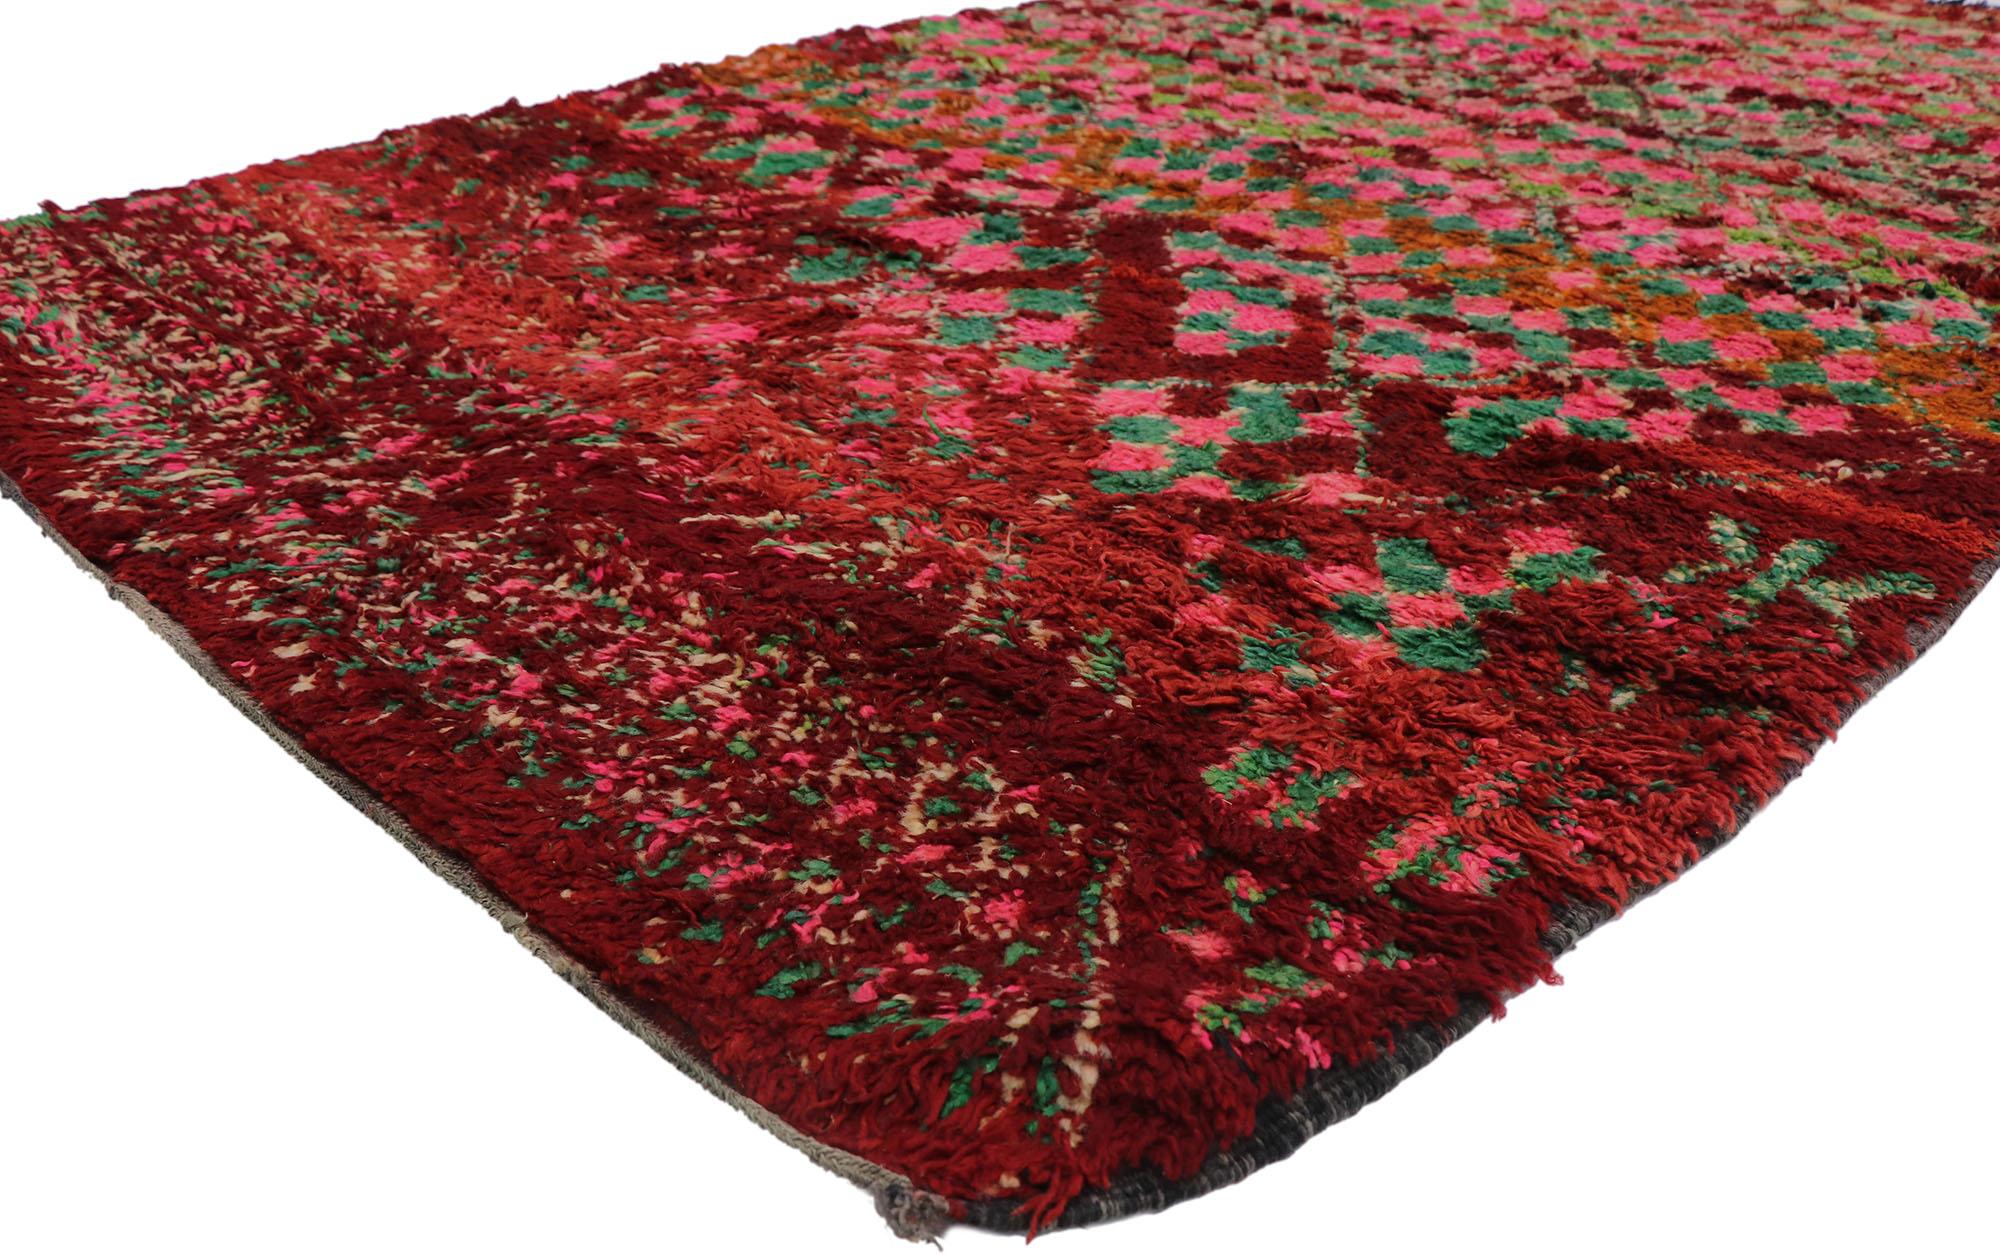 21509, vintage Berber Beni M'Guild Moroccan rug with Bohemian style. Showcasing an expressive tribal design, incredible detail and texture, this hand knotted wool vintage Berber Beni M'Guild Moroccan rug is a captivating vision of woven beauty. The